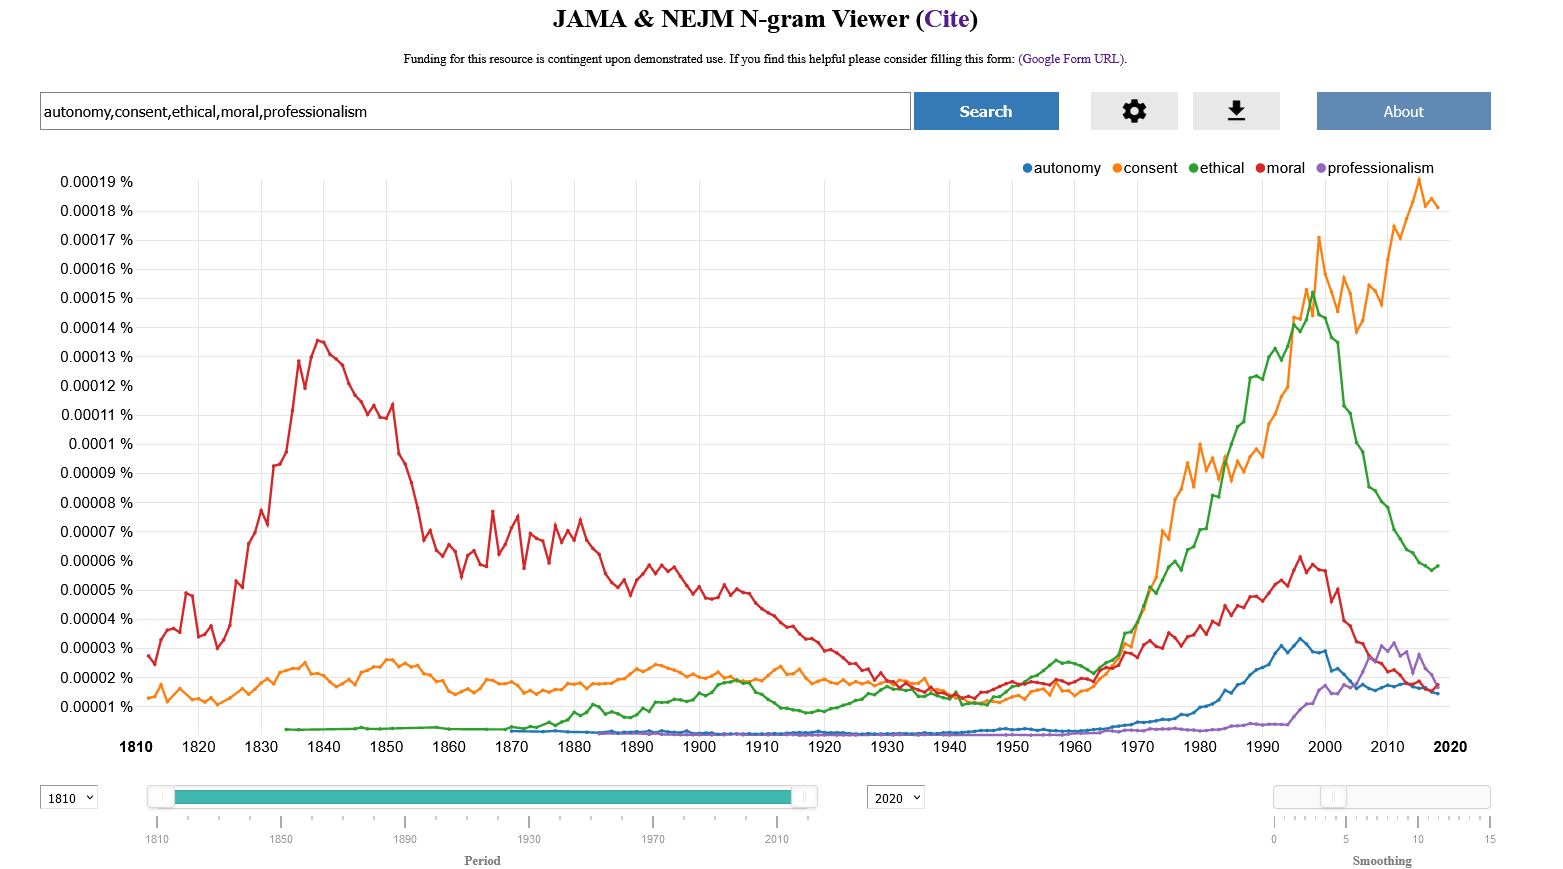 Screen shot of the Looking Glass N-gram Viewer showing that usage of the word moral has decreased in articles from a high in the 1830s. It also shows that, as of today, the following terms are used in order of decreasing popularity: consent (most commonly used), ethical, moral, professionalism, and autonomy (least common).